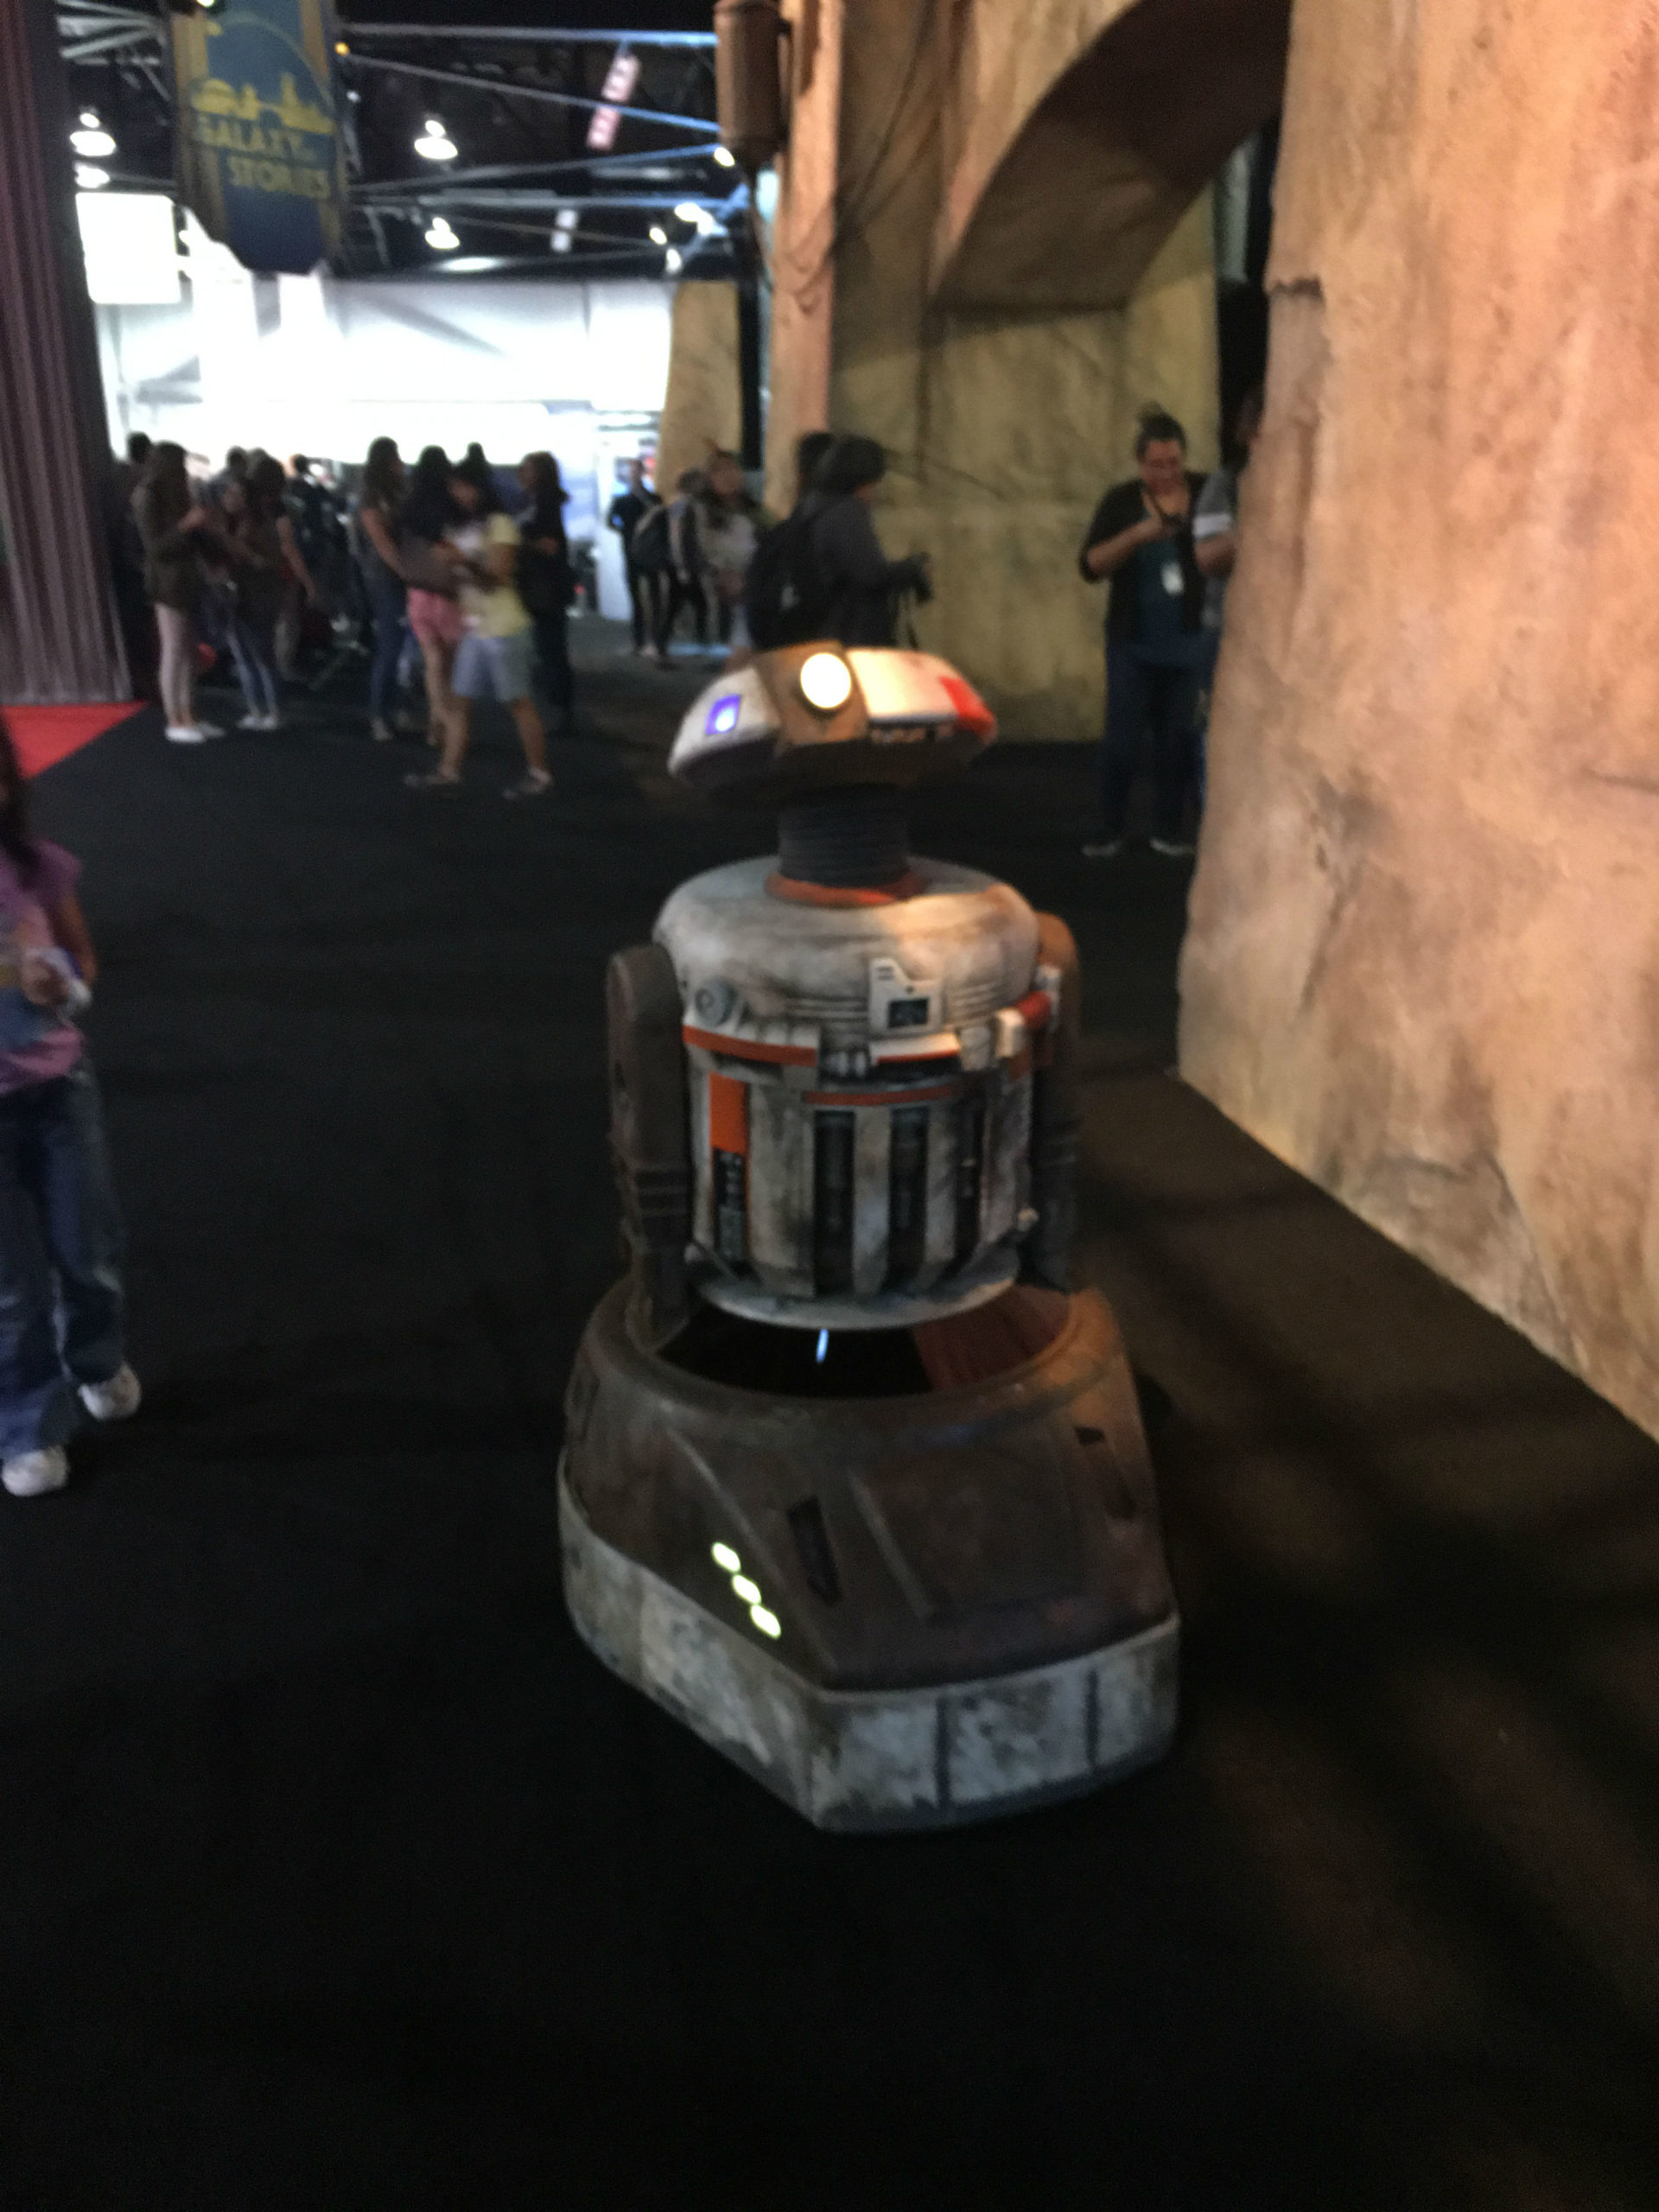 This Mysterious New Droid Is Rolling Around The Star Wars Section At D23 Expo